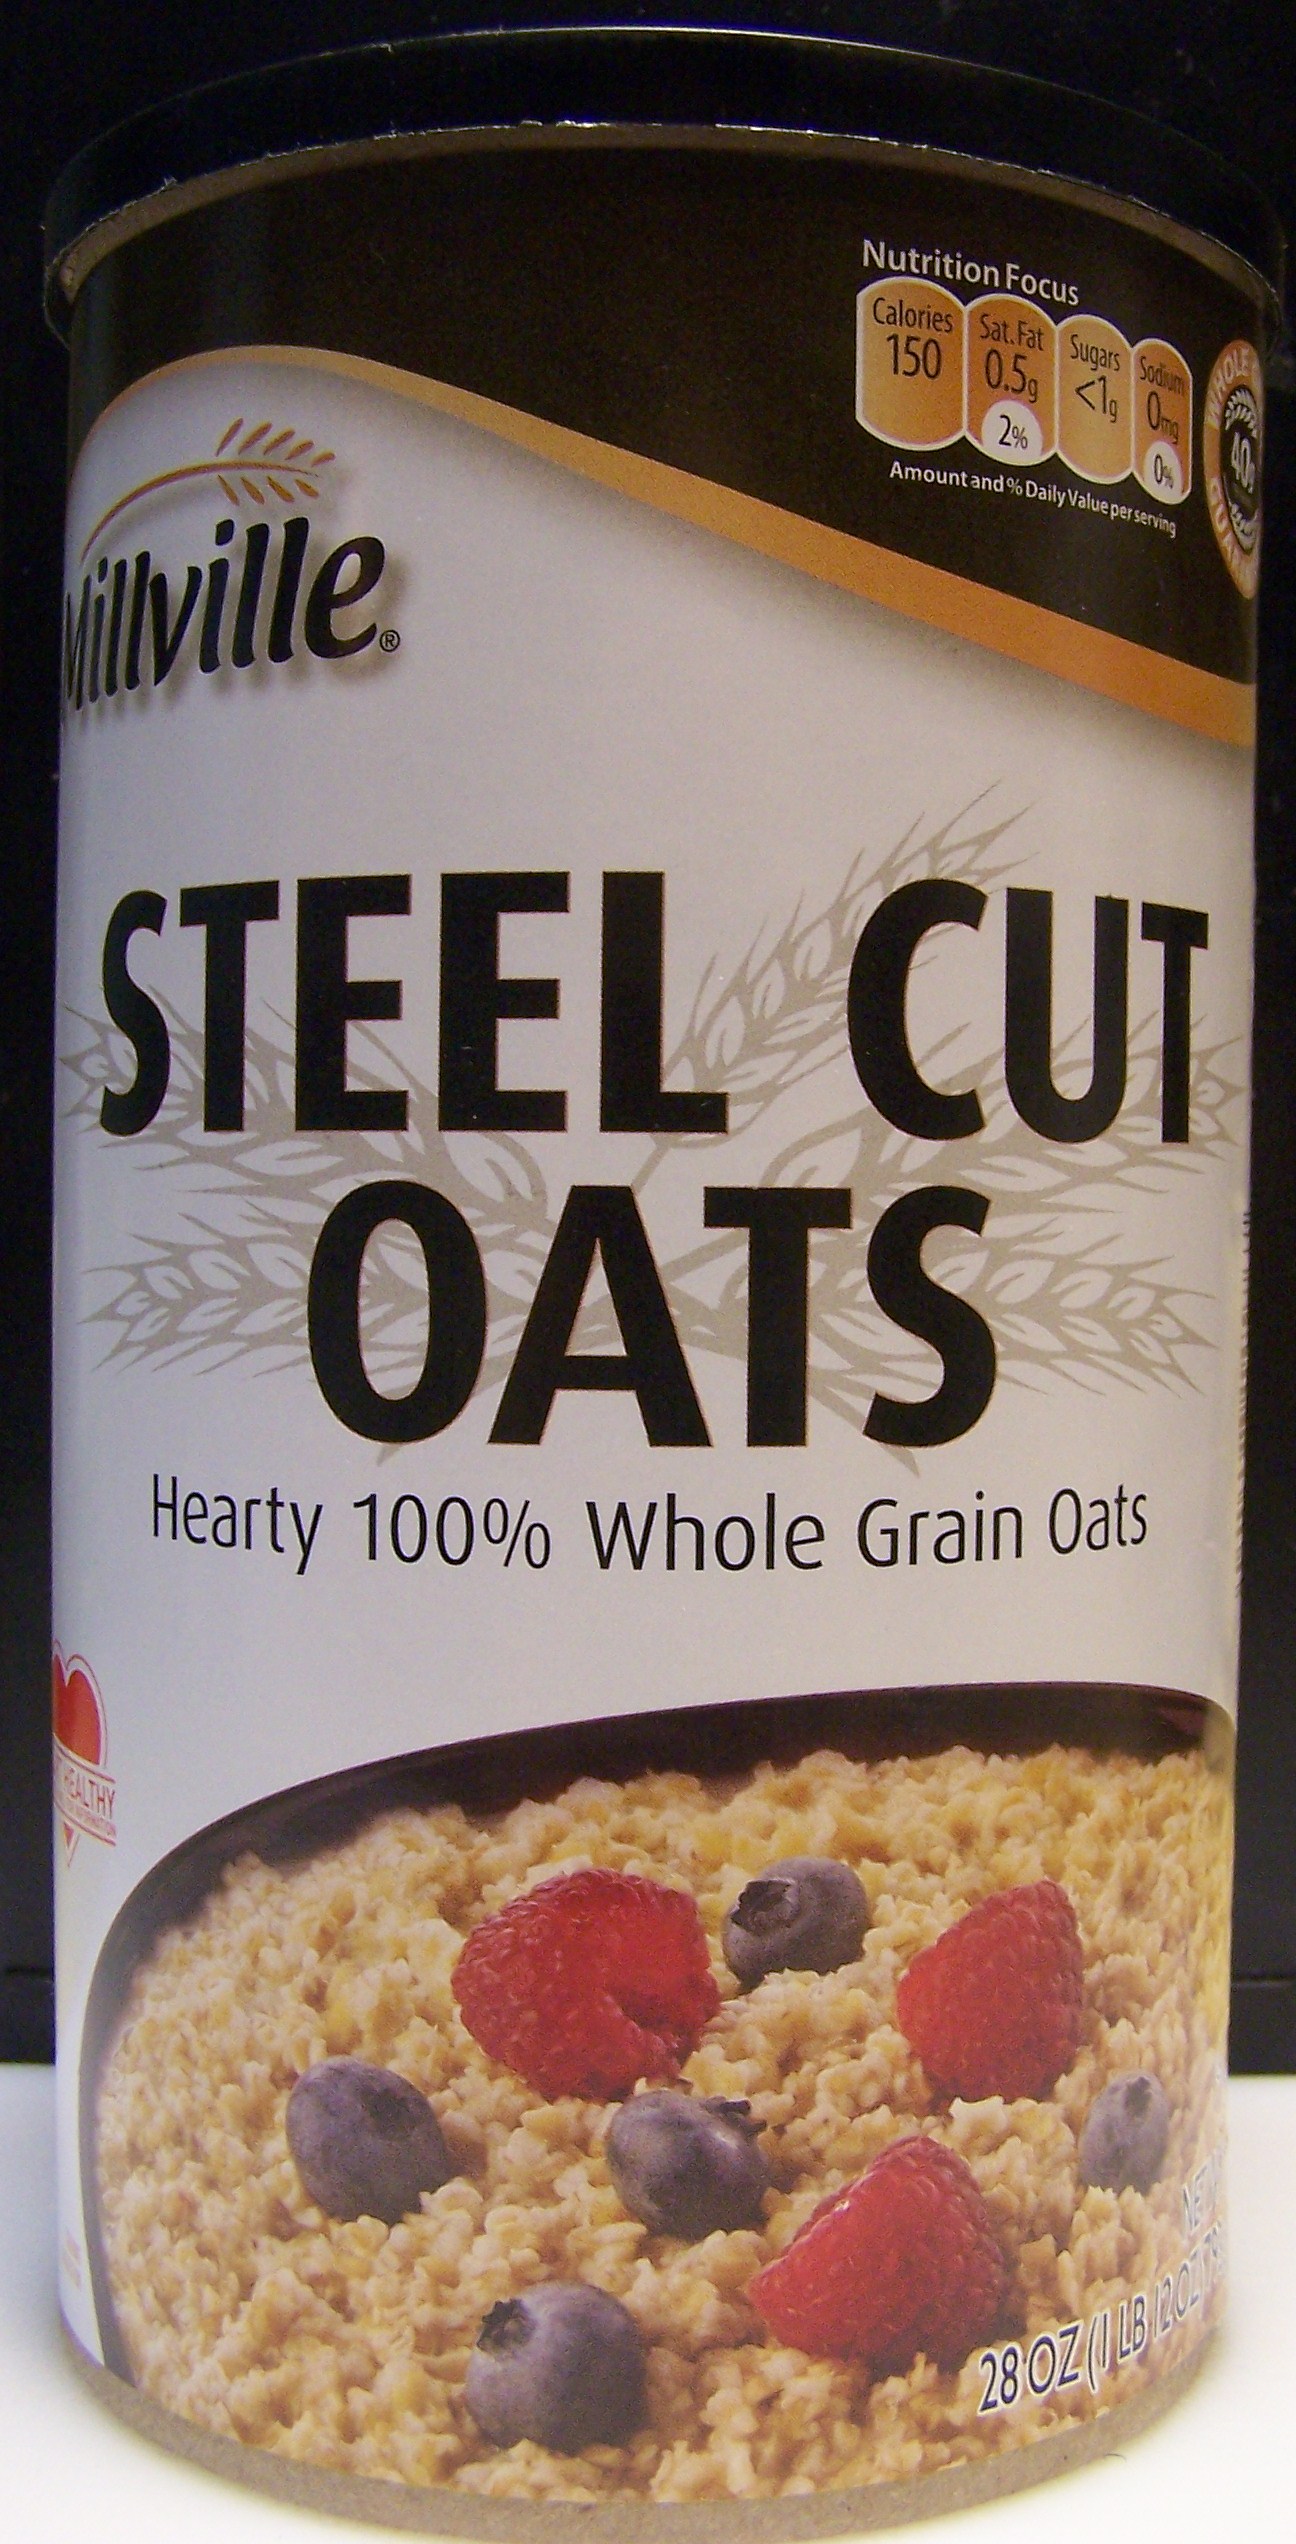 uncle tobys steel cut oats cooking instructions